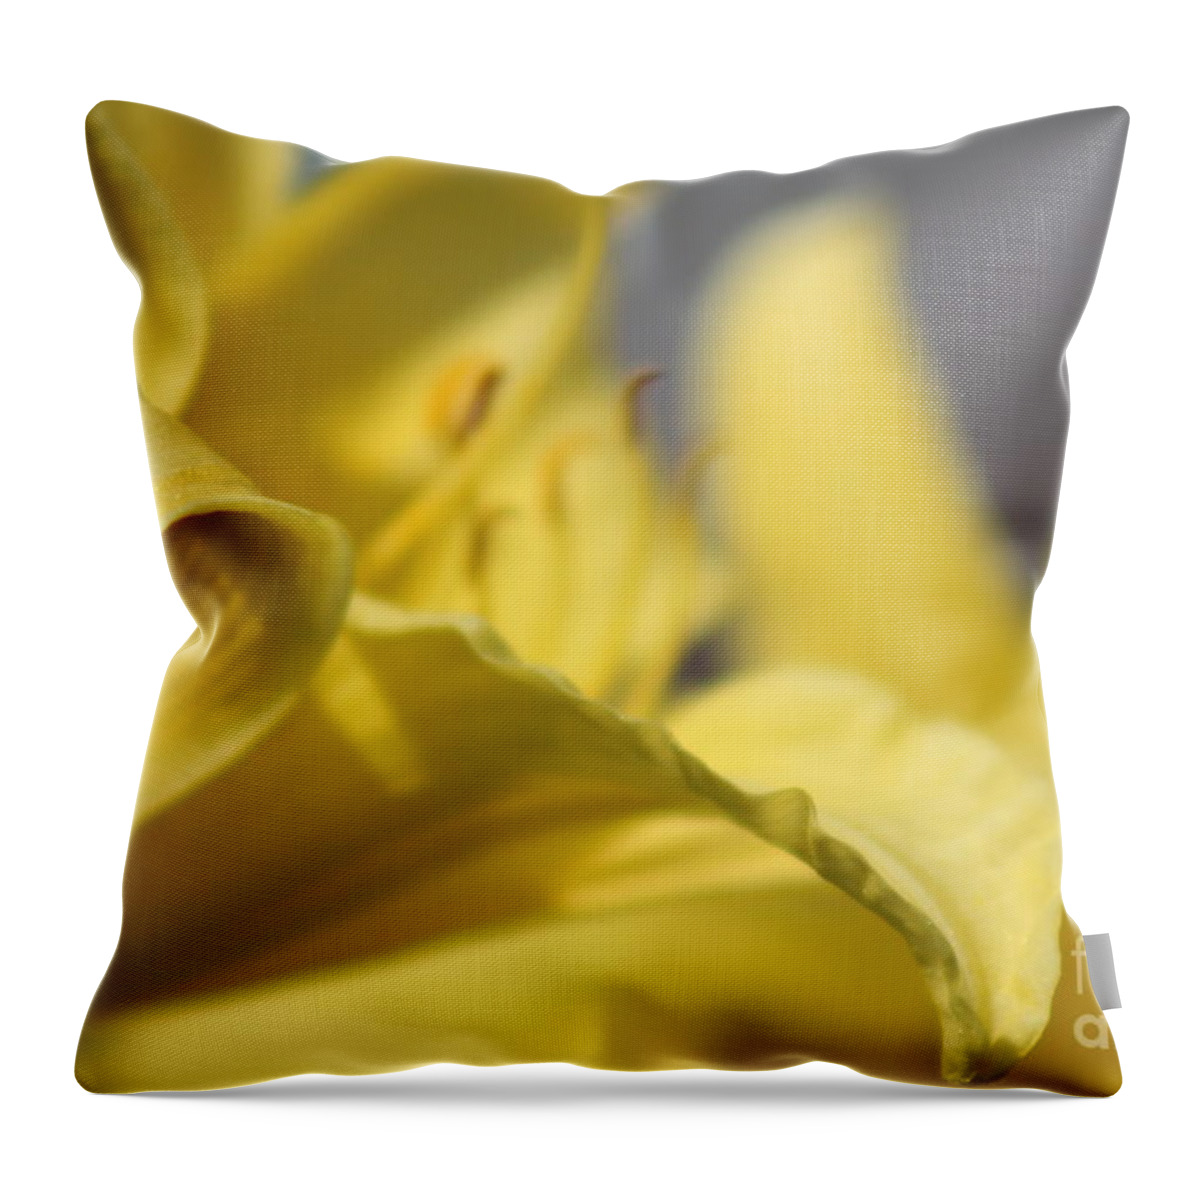 Yellow Throw Pillow featuring the photograph Nature's Beauty 48 by Deena Withycombe